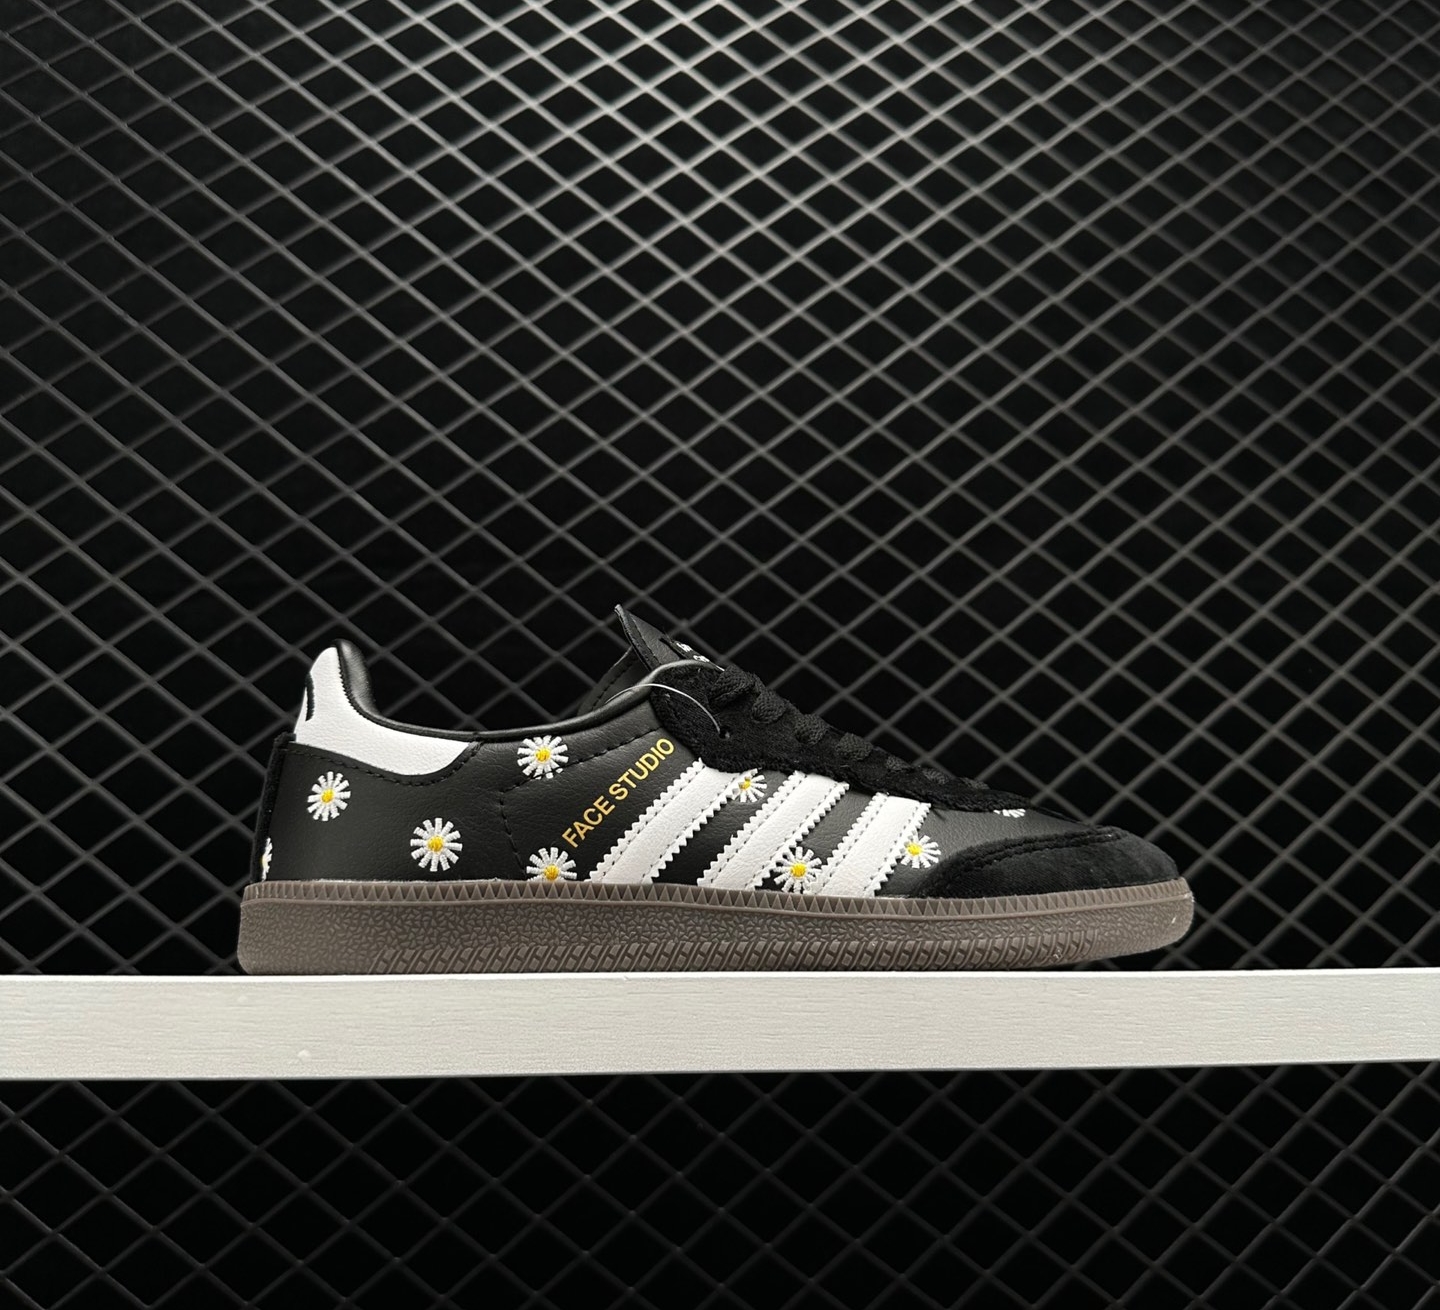 Adidas Atmos x FACE x Samba OG 'Embroidered Daisies' H03848: Limited Edition Stylish Sneakers